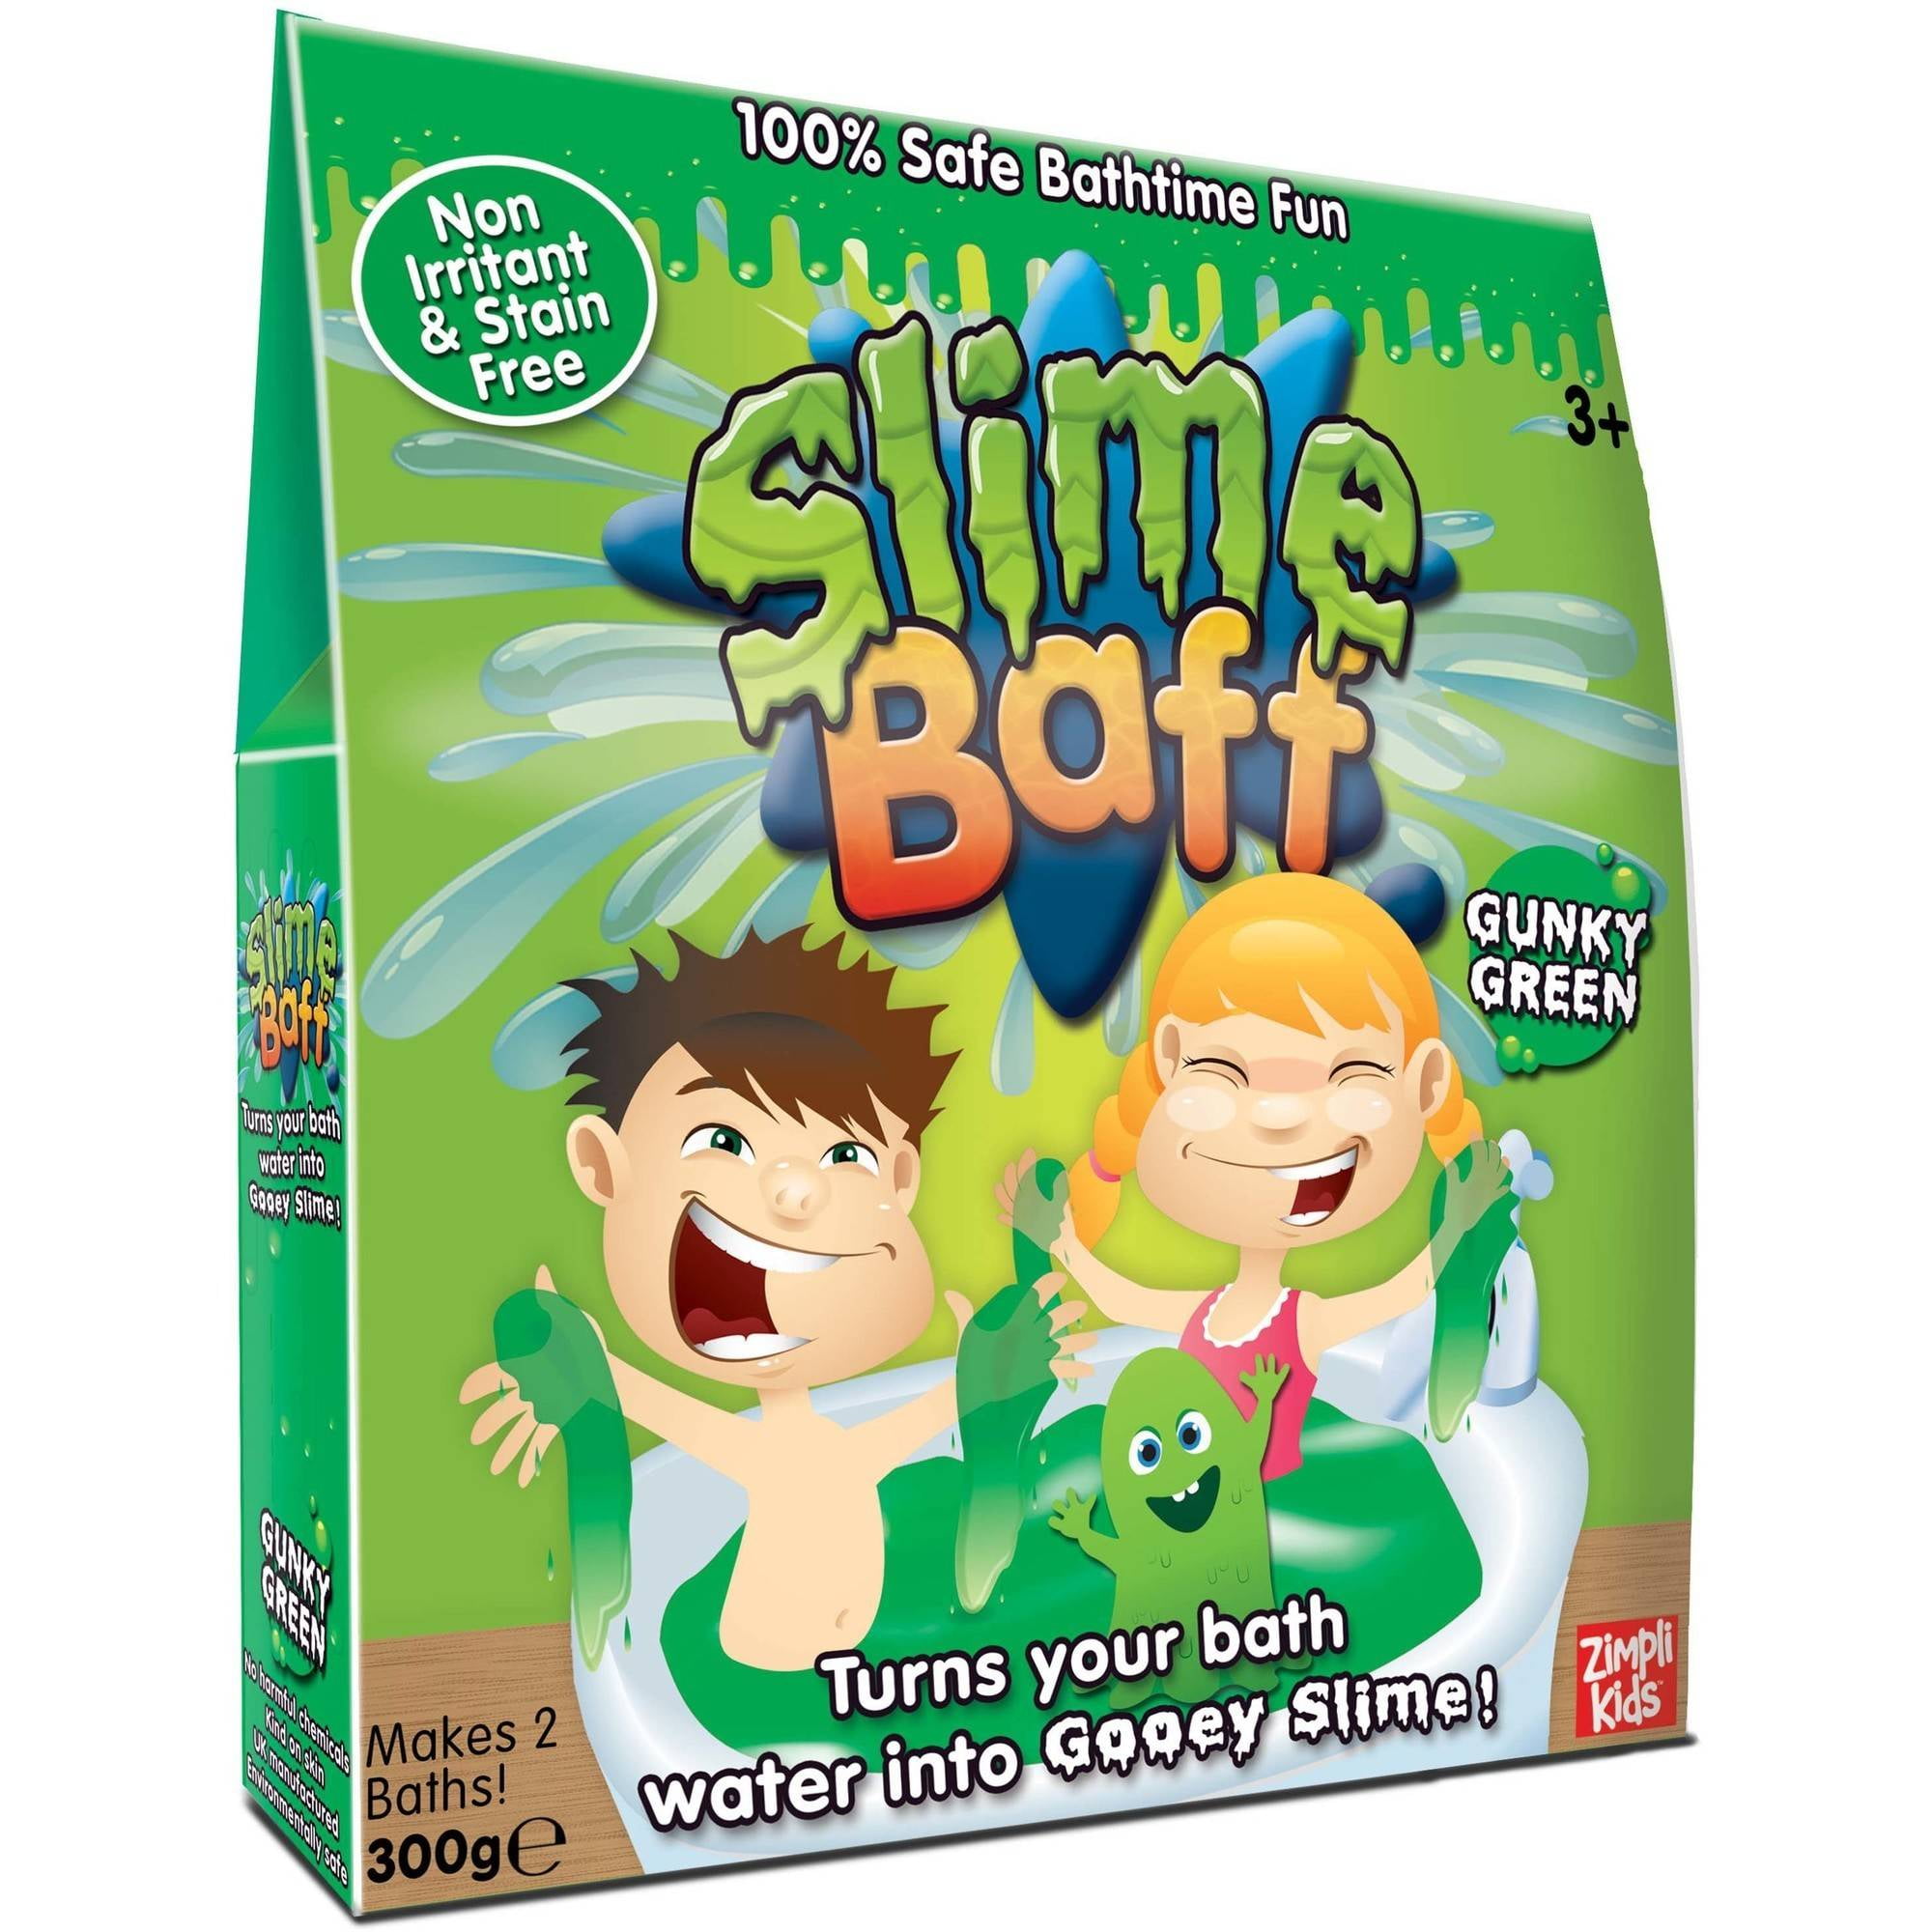 NEW OOZE BAFF Green Slime Powder  Skin Safe  Easy Clean Youtube  Family Fun 